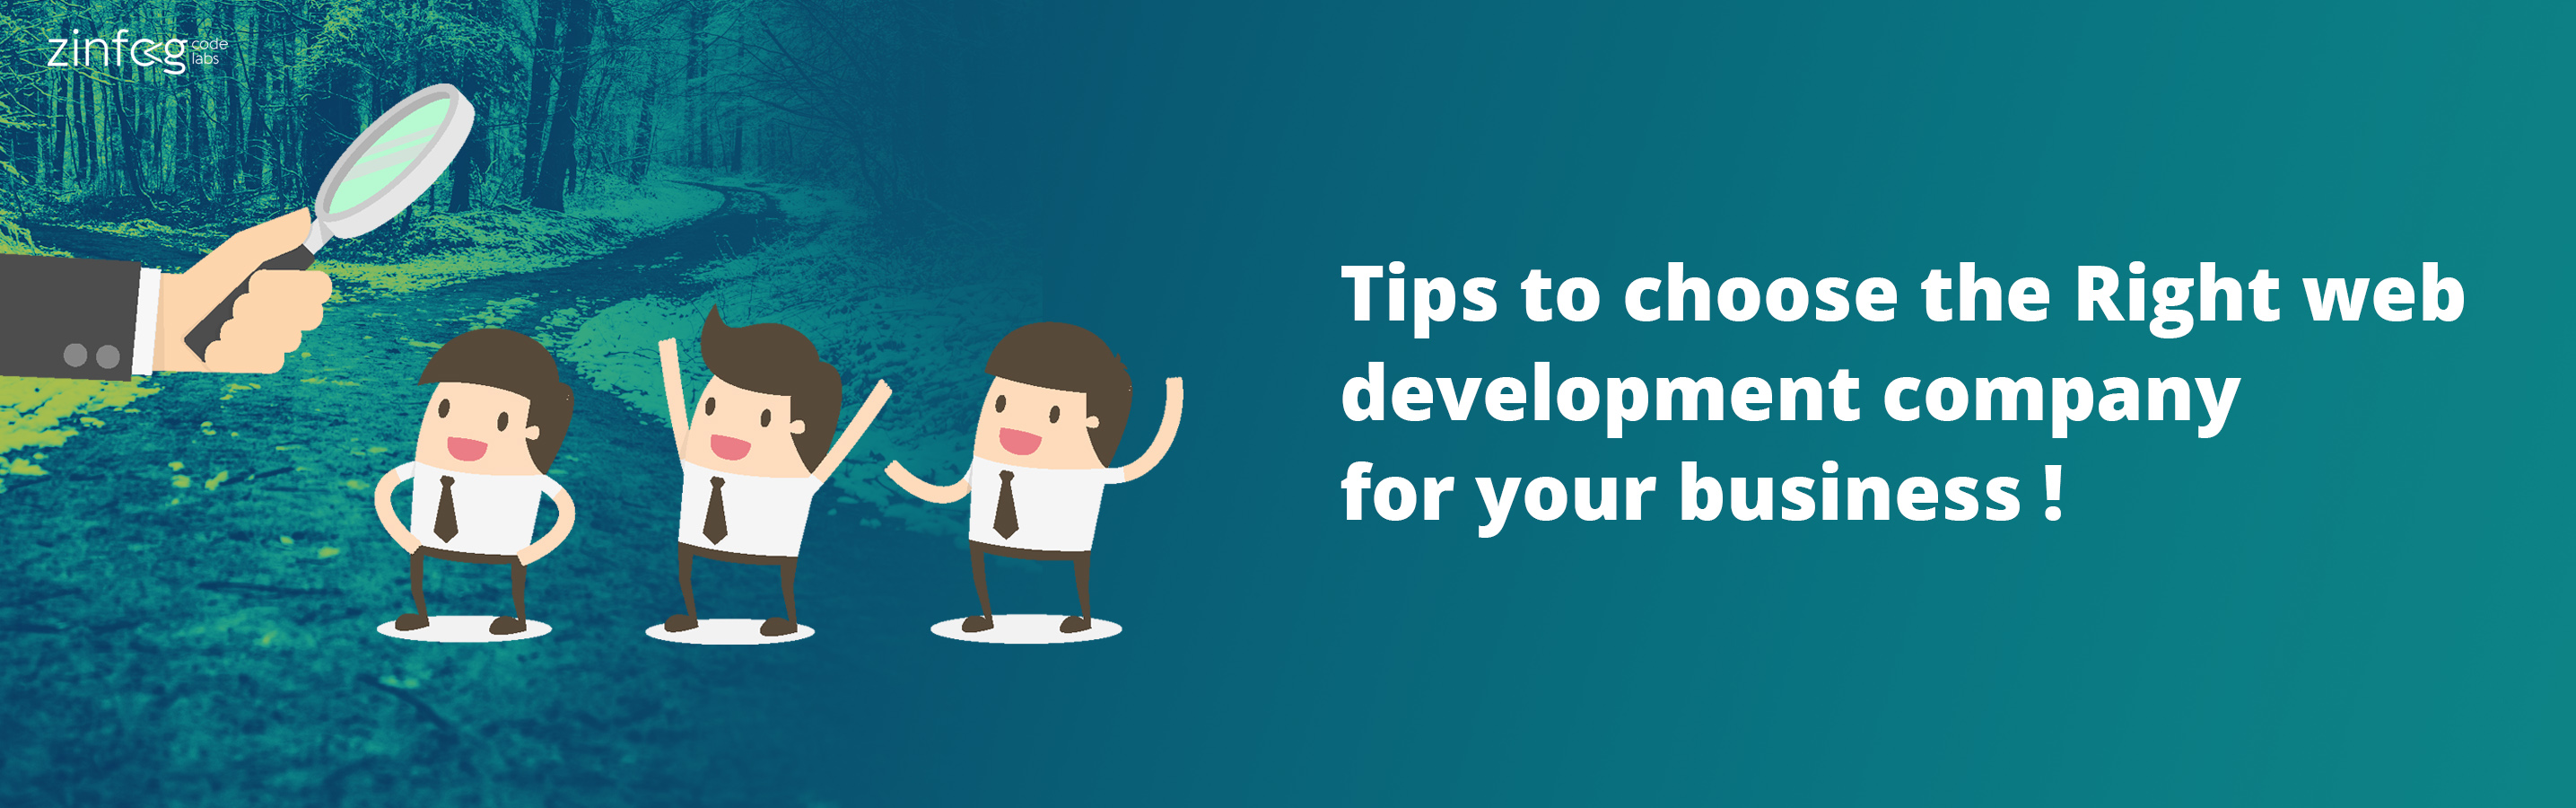 tips_to_choose_the_right_web_development_company_for_your_business.html